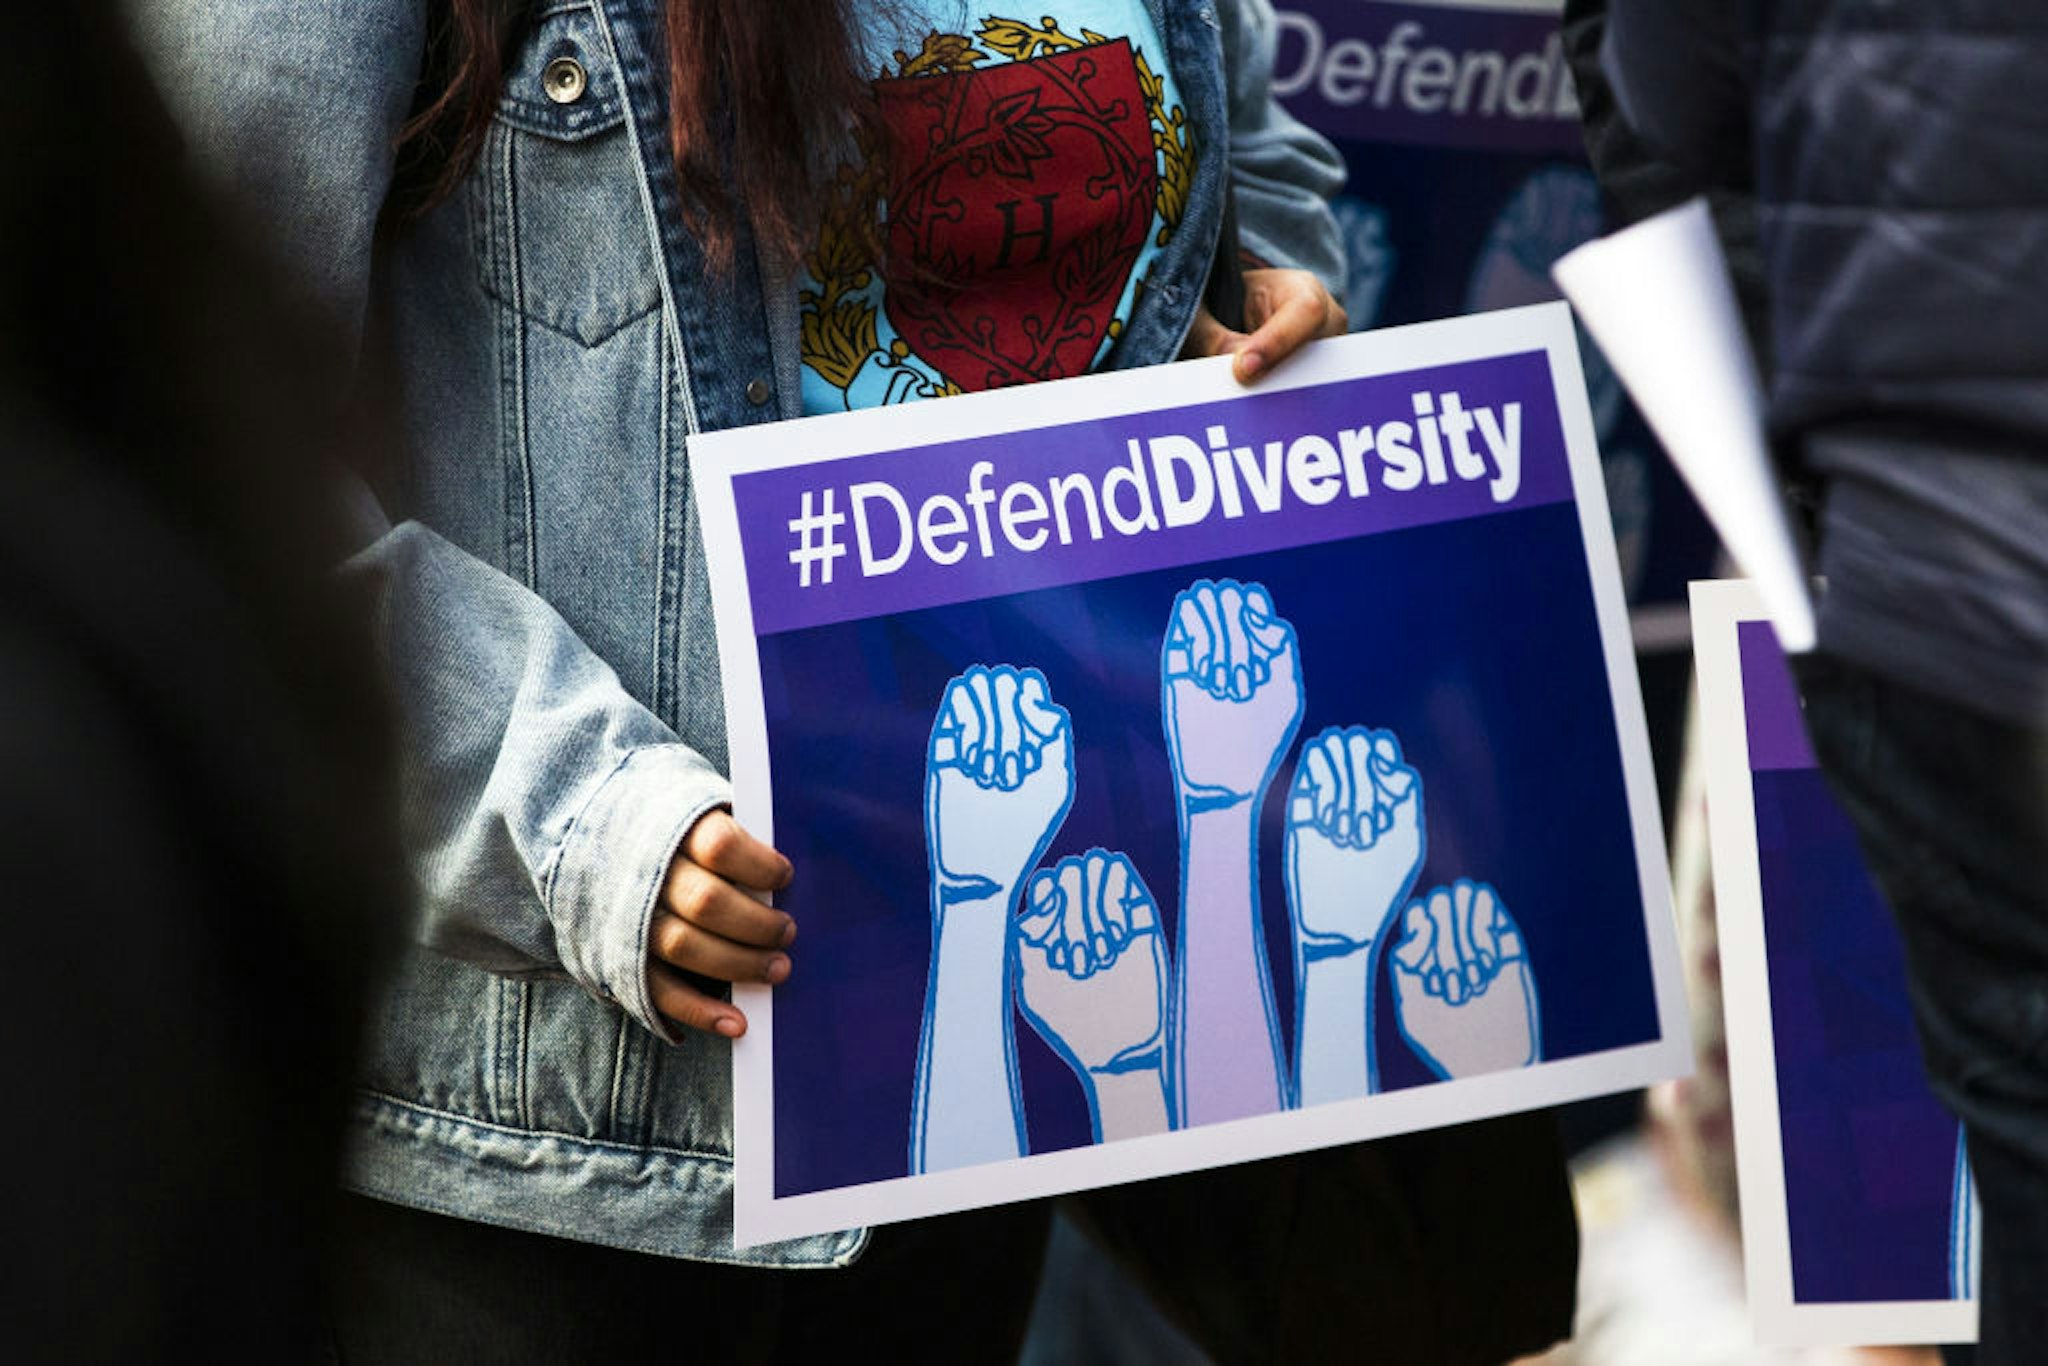 A demonstrator supporting Harvard University's admission process holds a sign that reads "Defend Diversity" during a protest outside of the Massachusetts Bay Transportation Authority (MBTA) Harvard station in Cambridge, Massachusetts, U.S., on Sunday, Oct. 14, 2018. Harvard University was sued by a group that claims their law school illegally used race and gender as criteria for selecting law students to staff their most elite academic journals, a suit that comes amid growing scrutiny of affirmative action in college admissions.